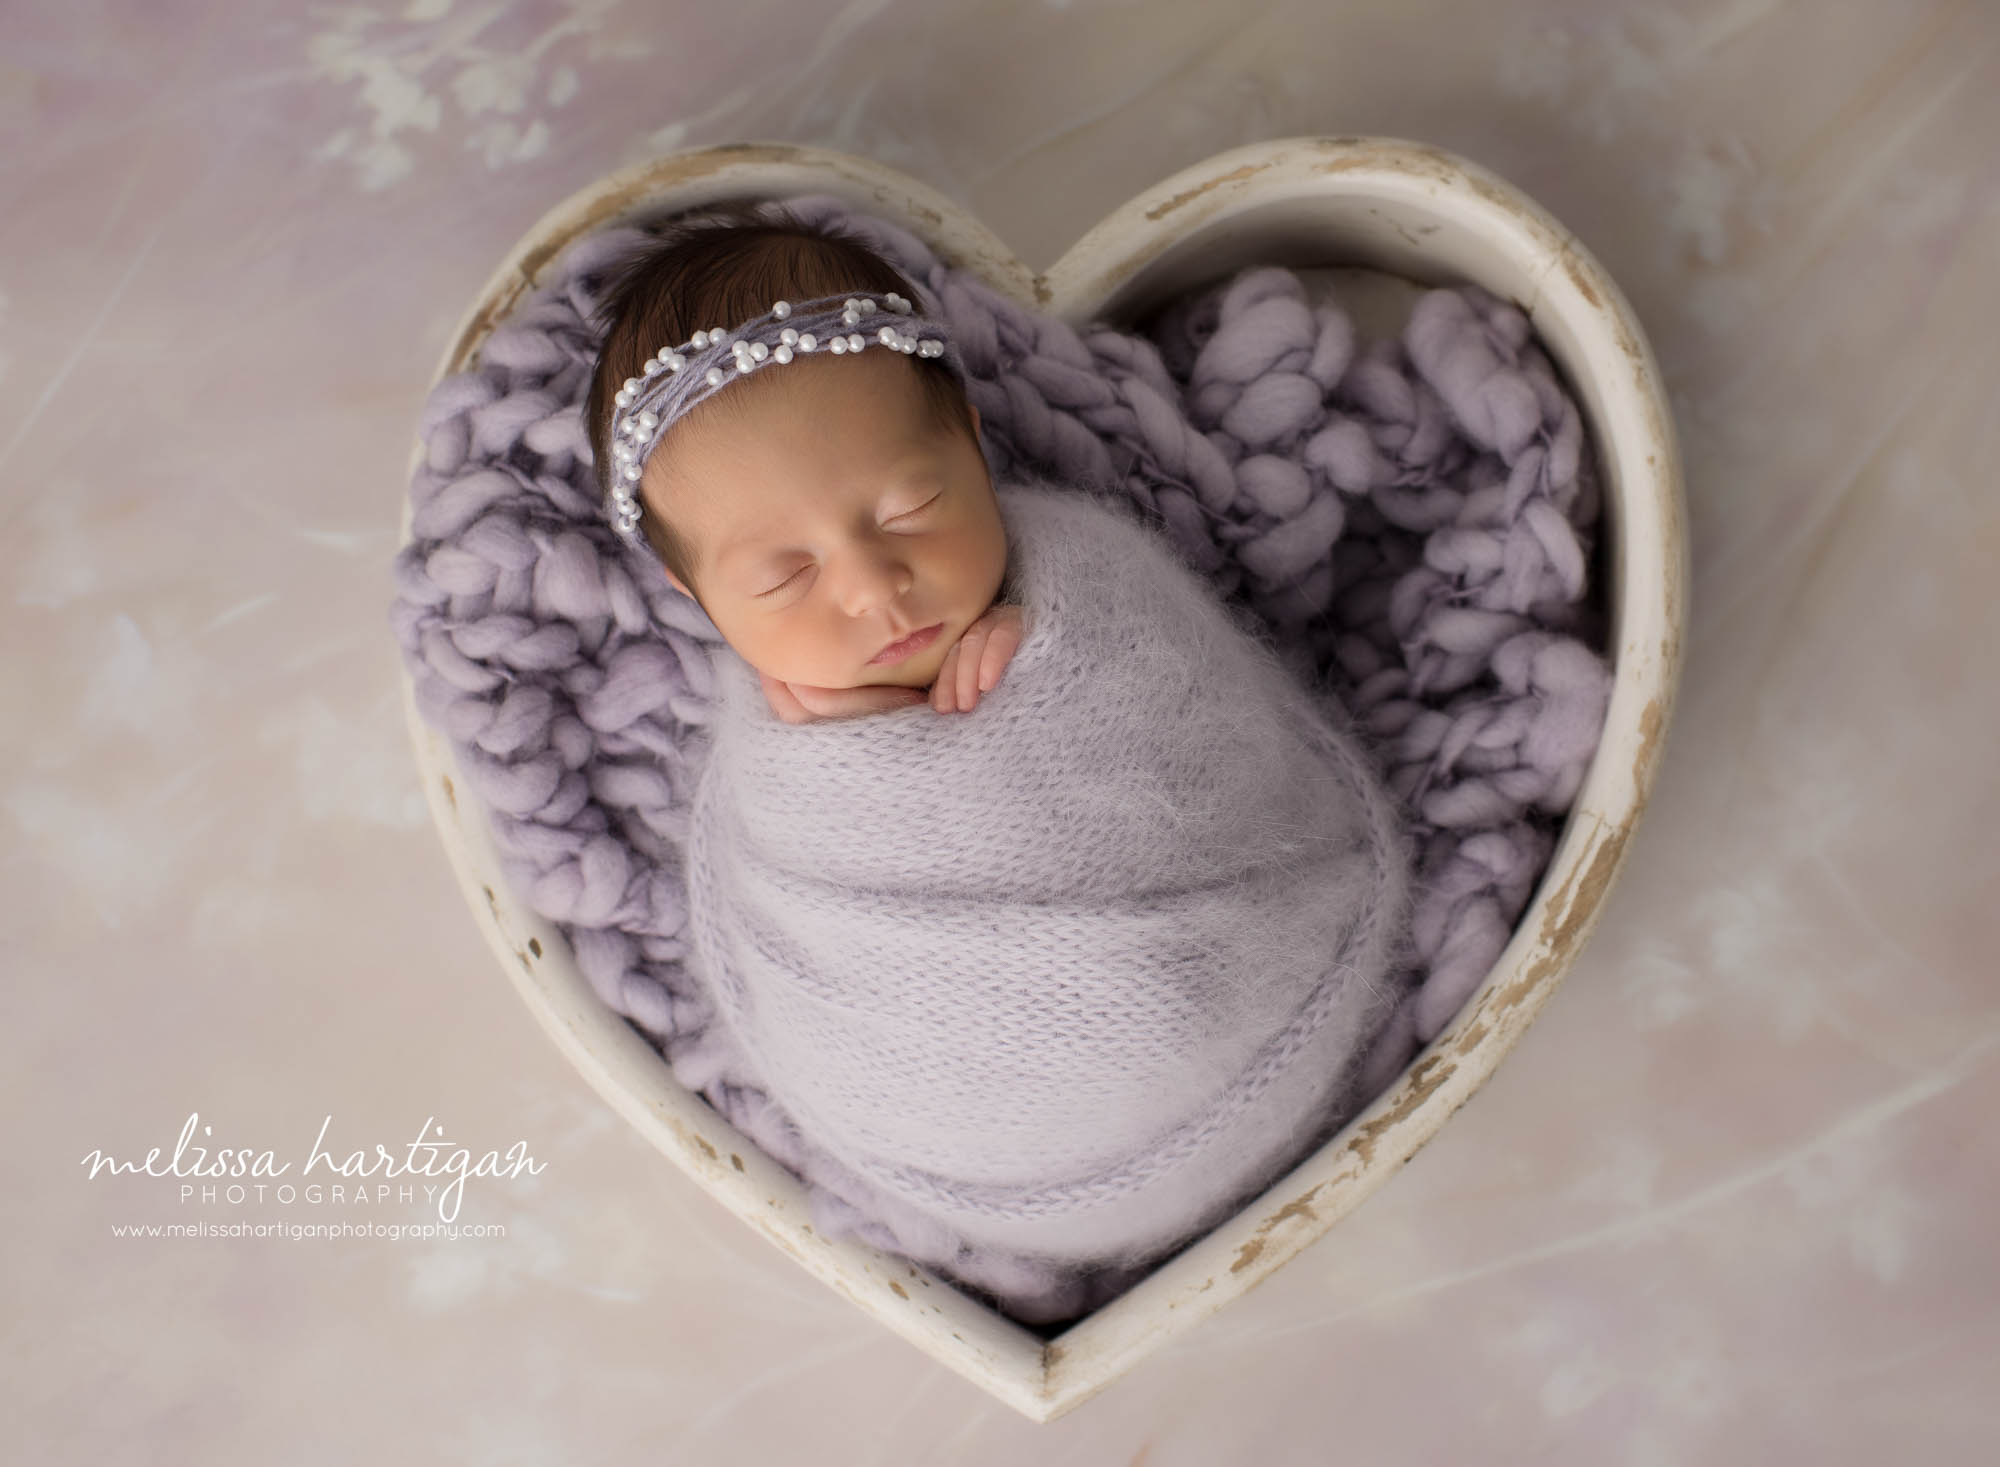 newborn baby girl wrapped in lavender purple wrap posed in wooden cream heart bowl prop wearing headband andover ct newborn photography